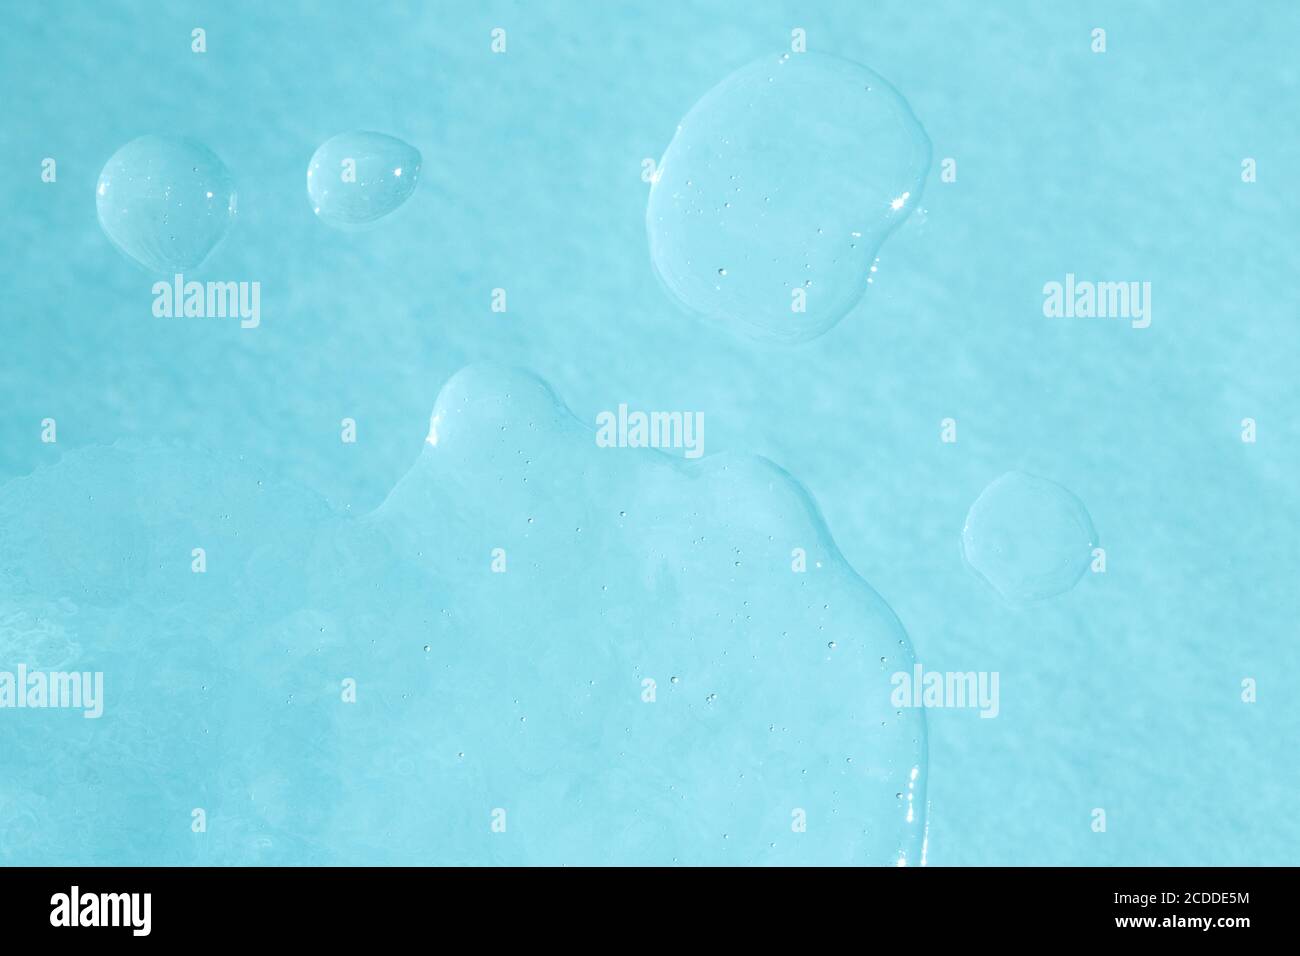 Squeezed cosmetic clear cream gel texture. Close up photo of transparent drop of skin care product. High Quality transparent gel with bubbles closeup on blue background. Stock Photo